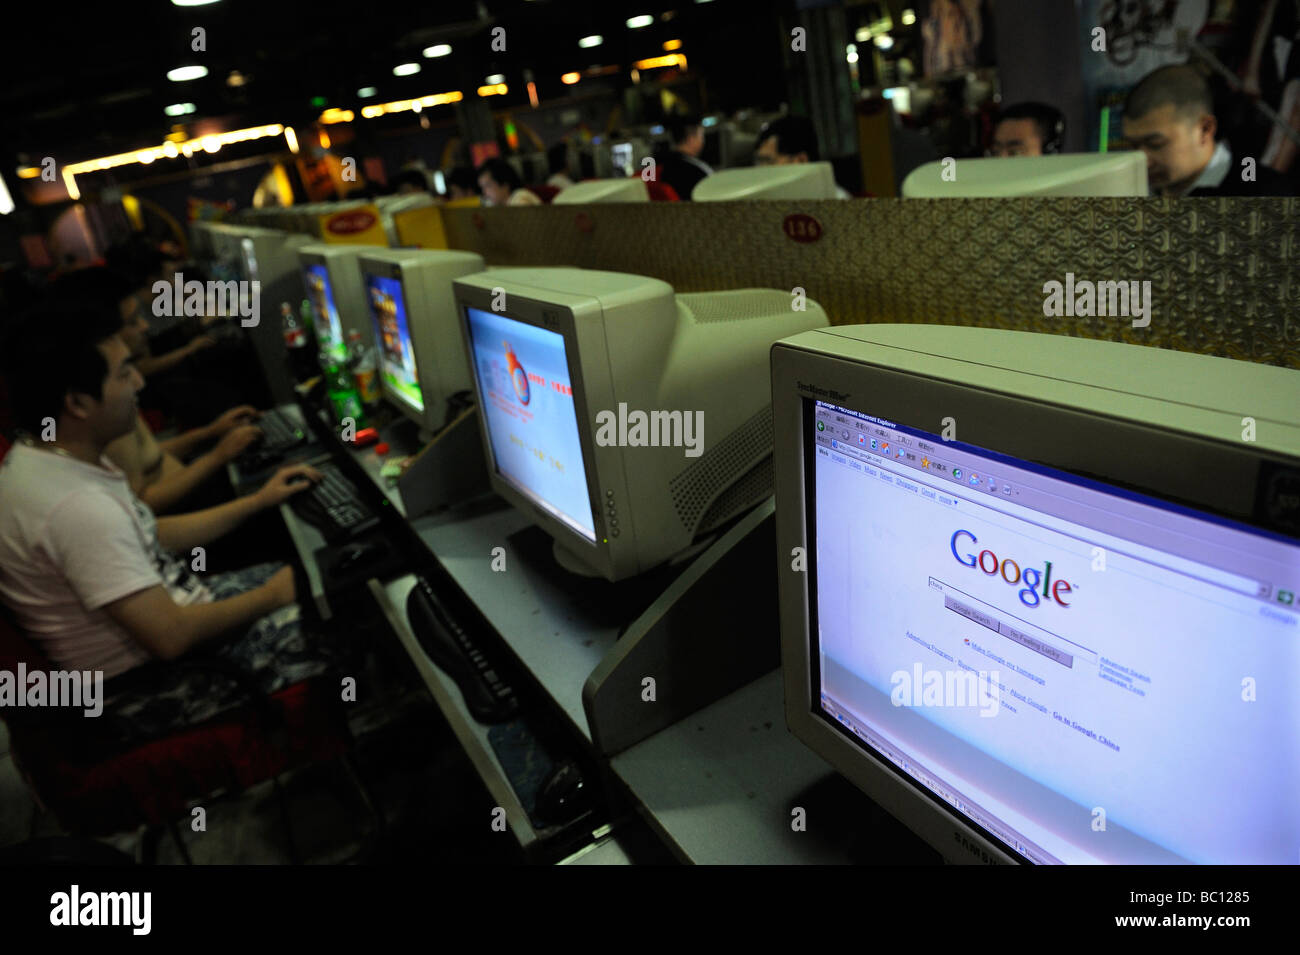 Google search engine at an internet cafe in Beijing, China. 21-Jun-2009 Stock Photo